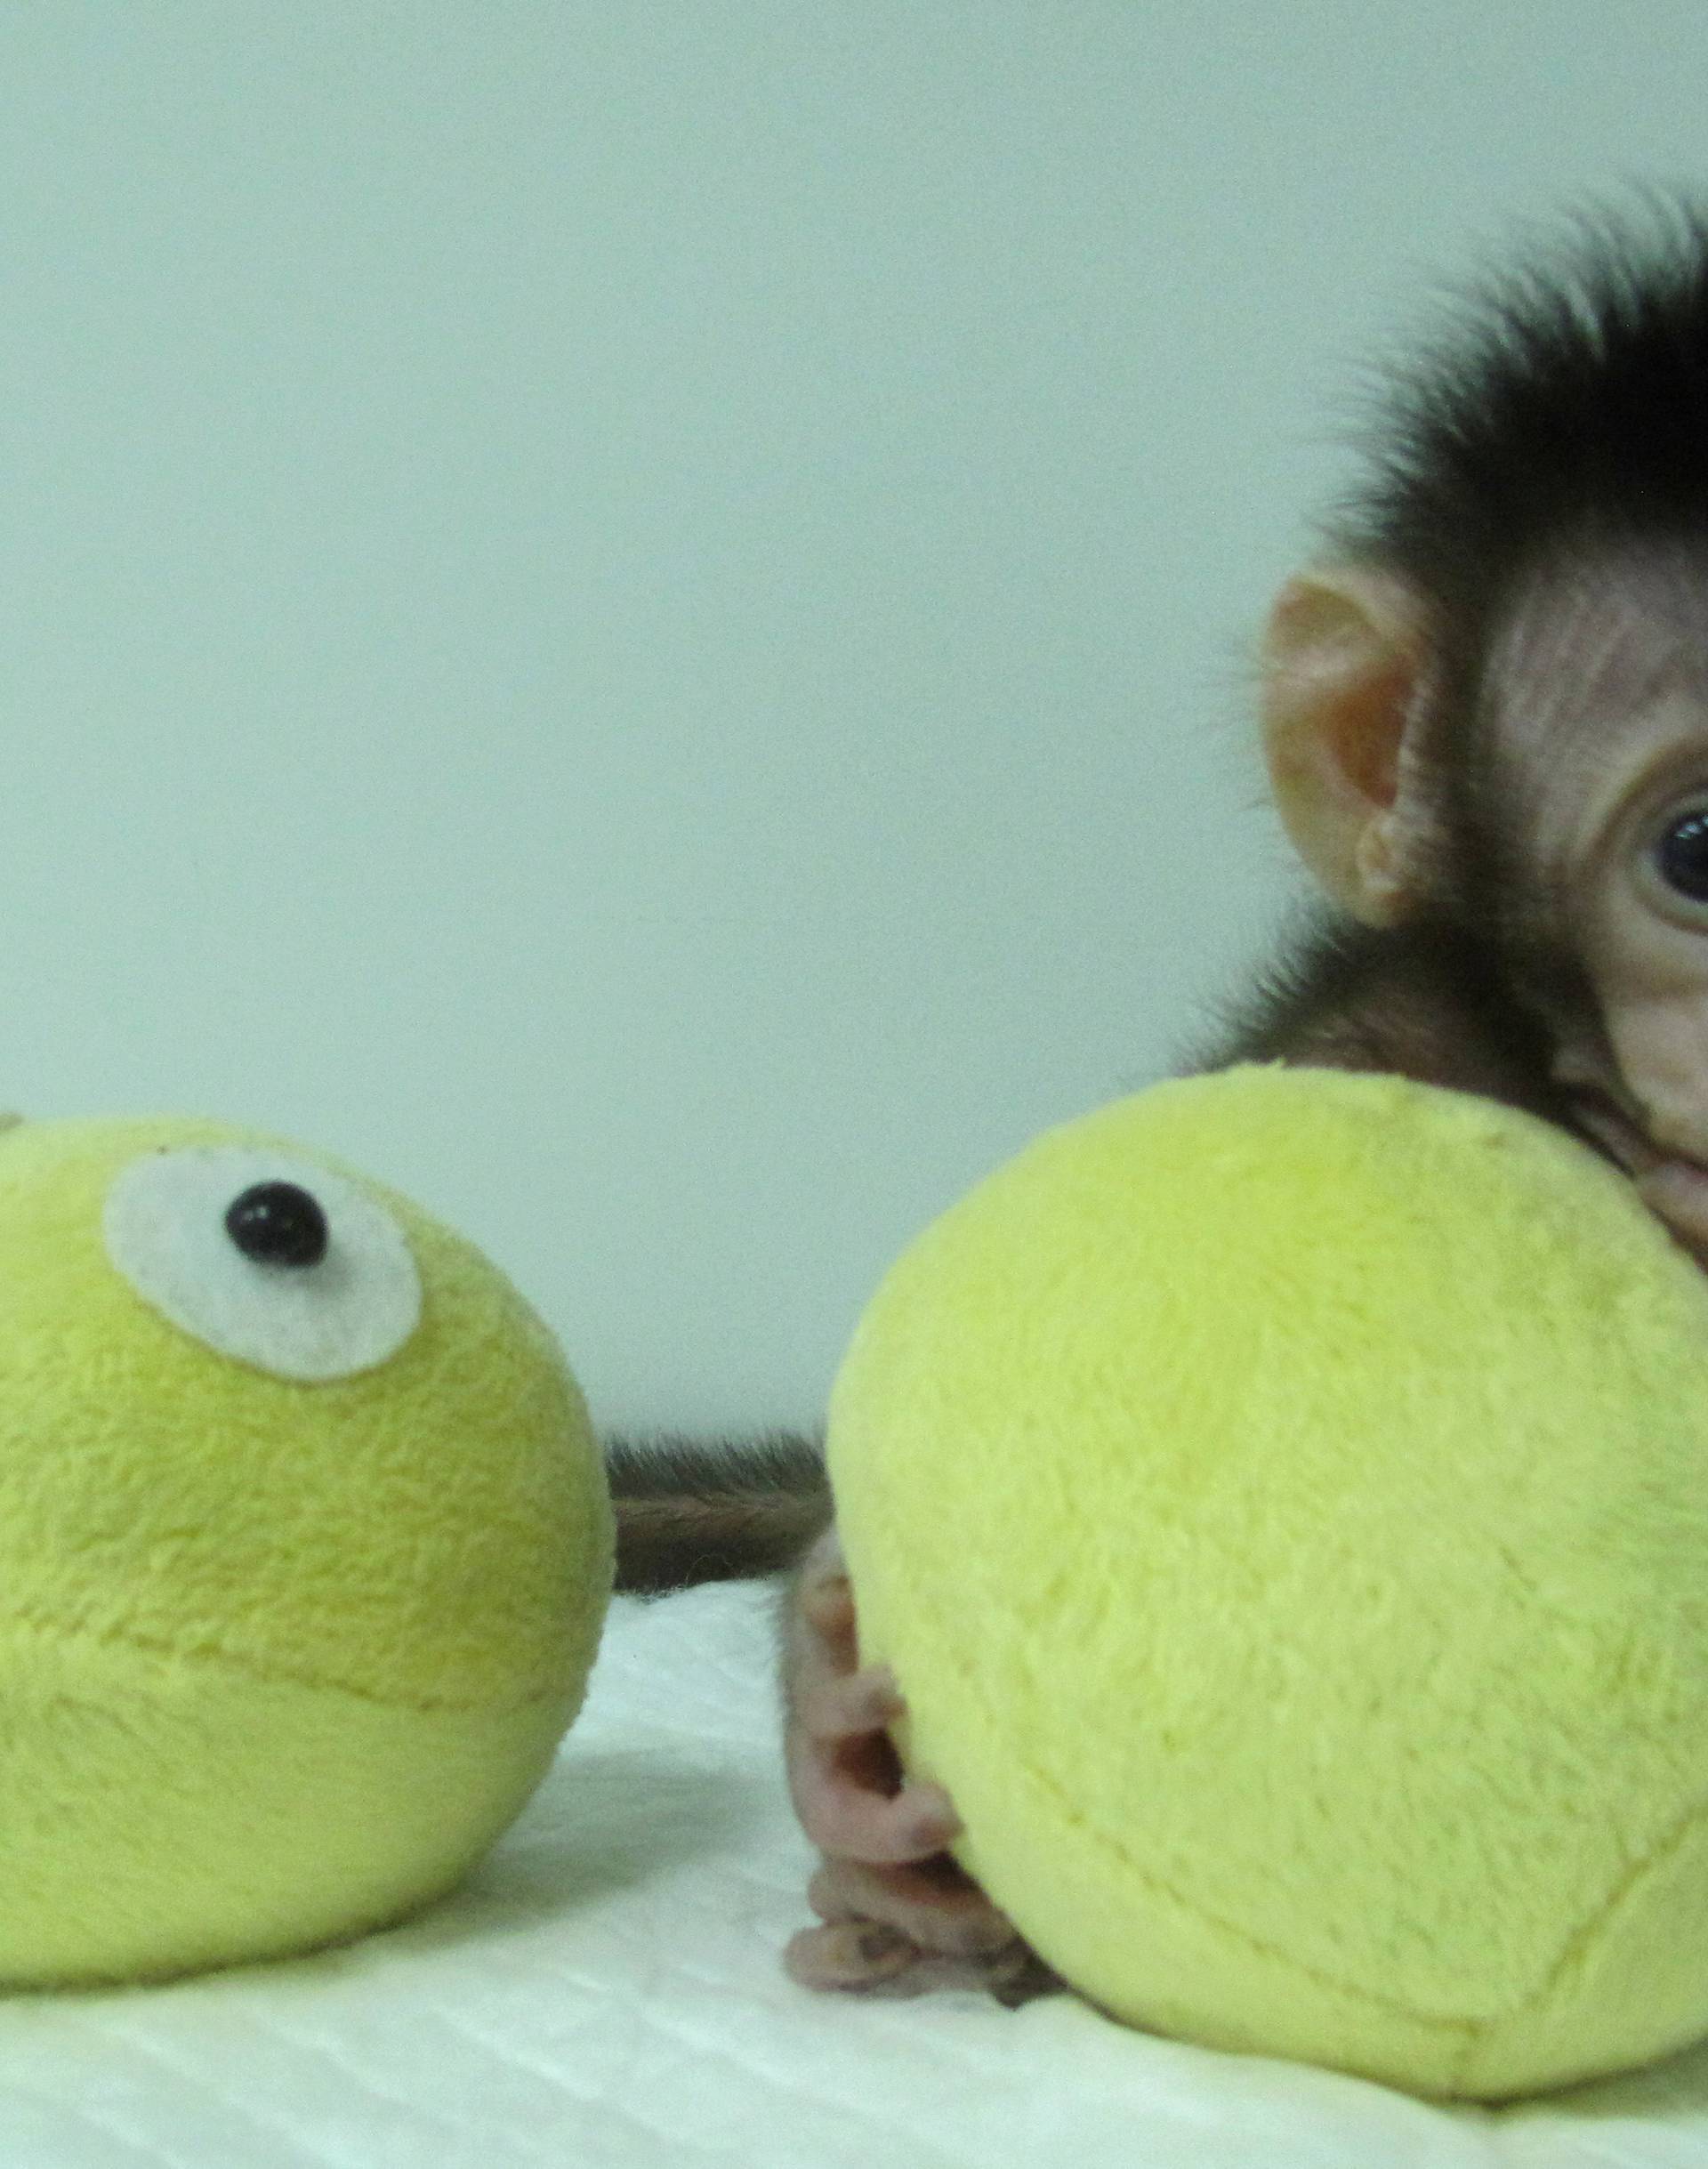 Huah Hua, a cloned long tailed macaque monkey is seen at the Non-Primate facility at the Chinese Academy of Sciences in Shanghai